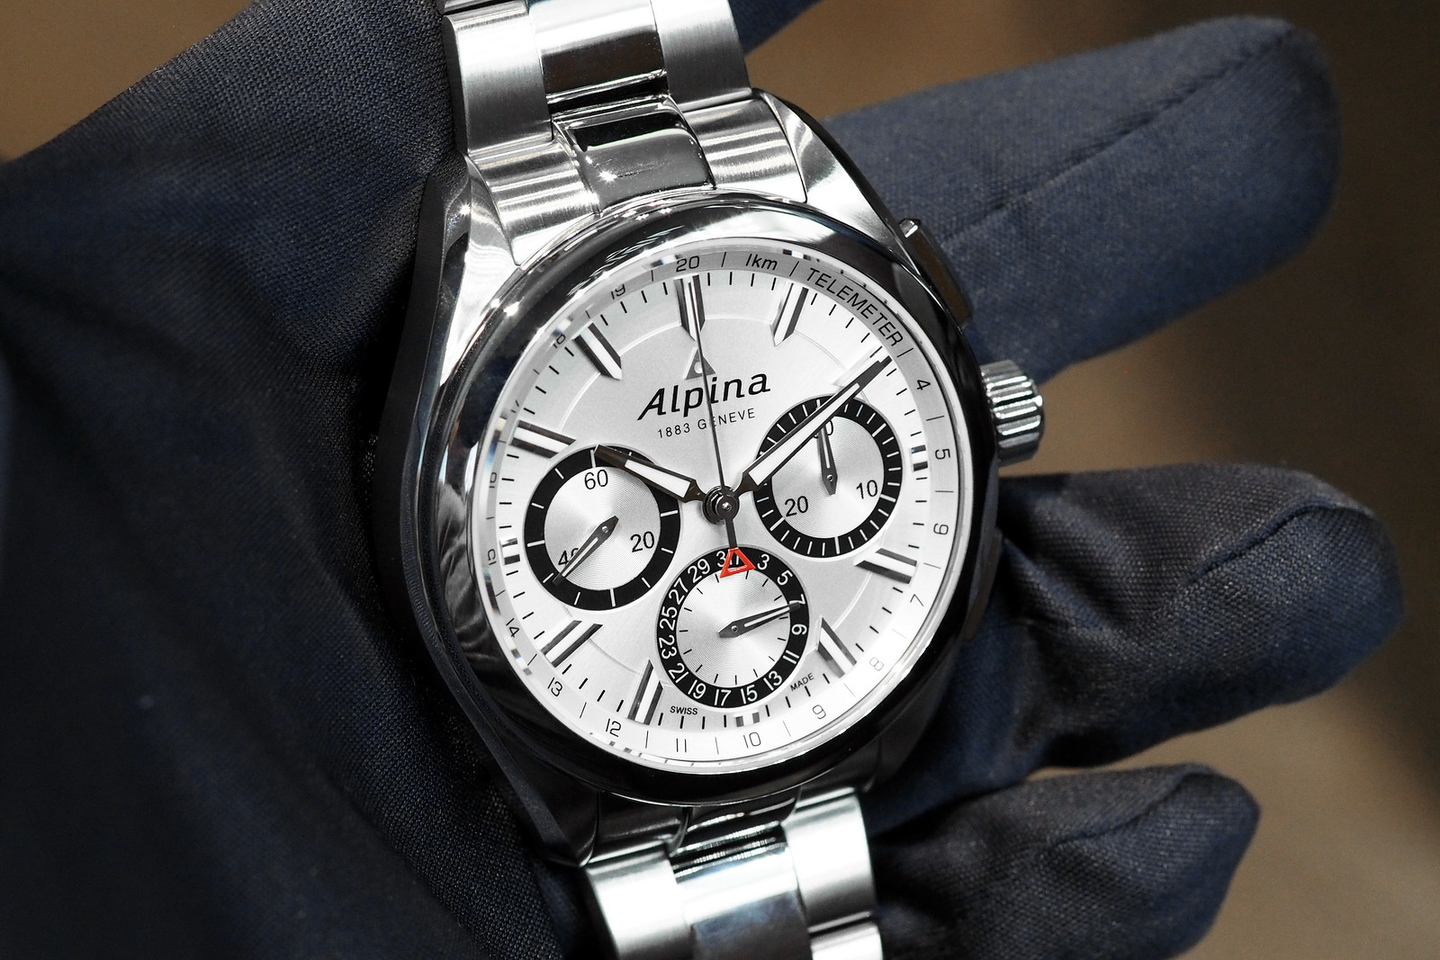 Alpina Introduces new in-house flyback chronograph